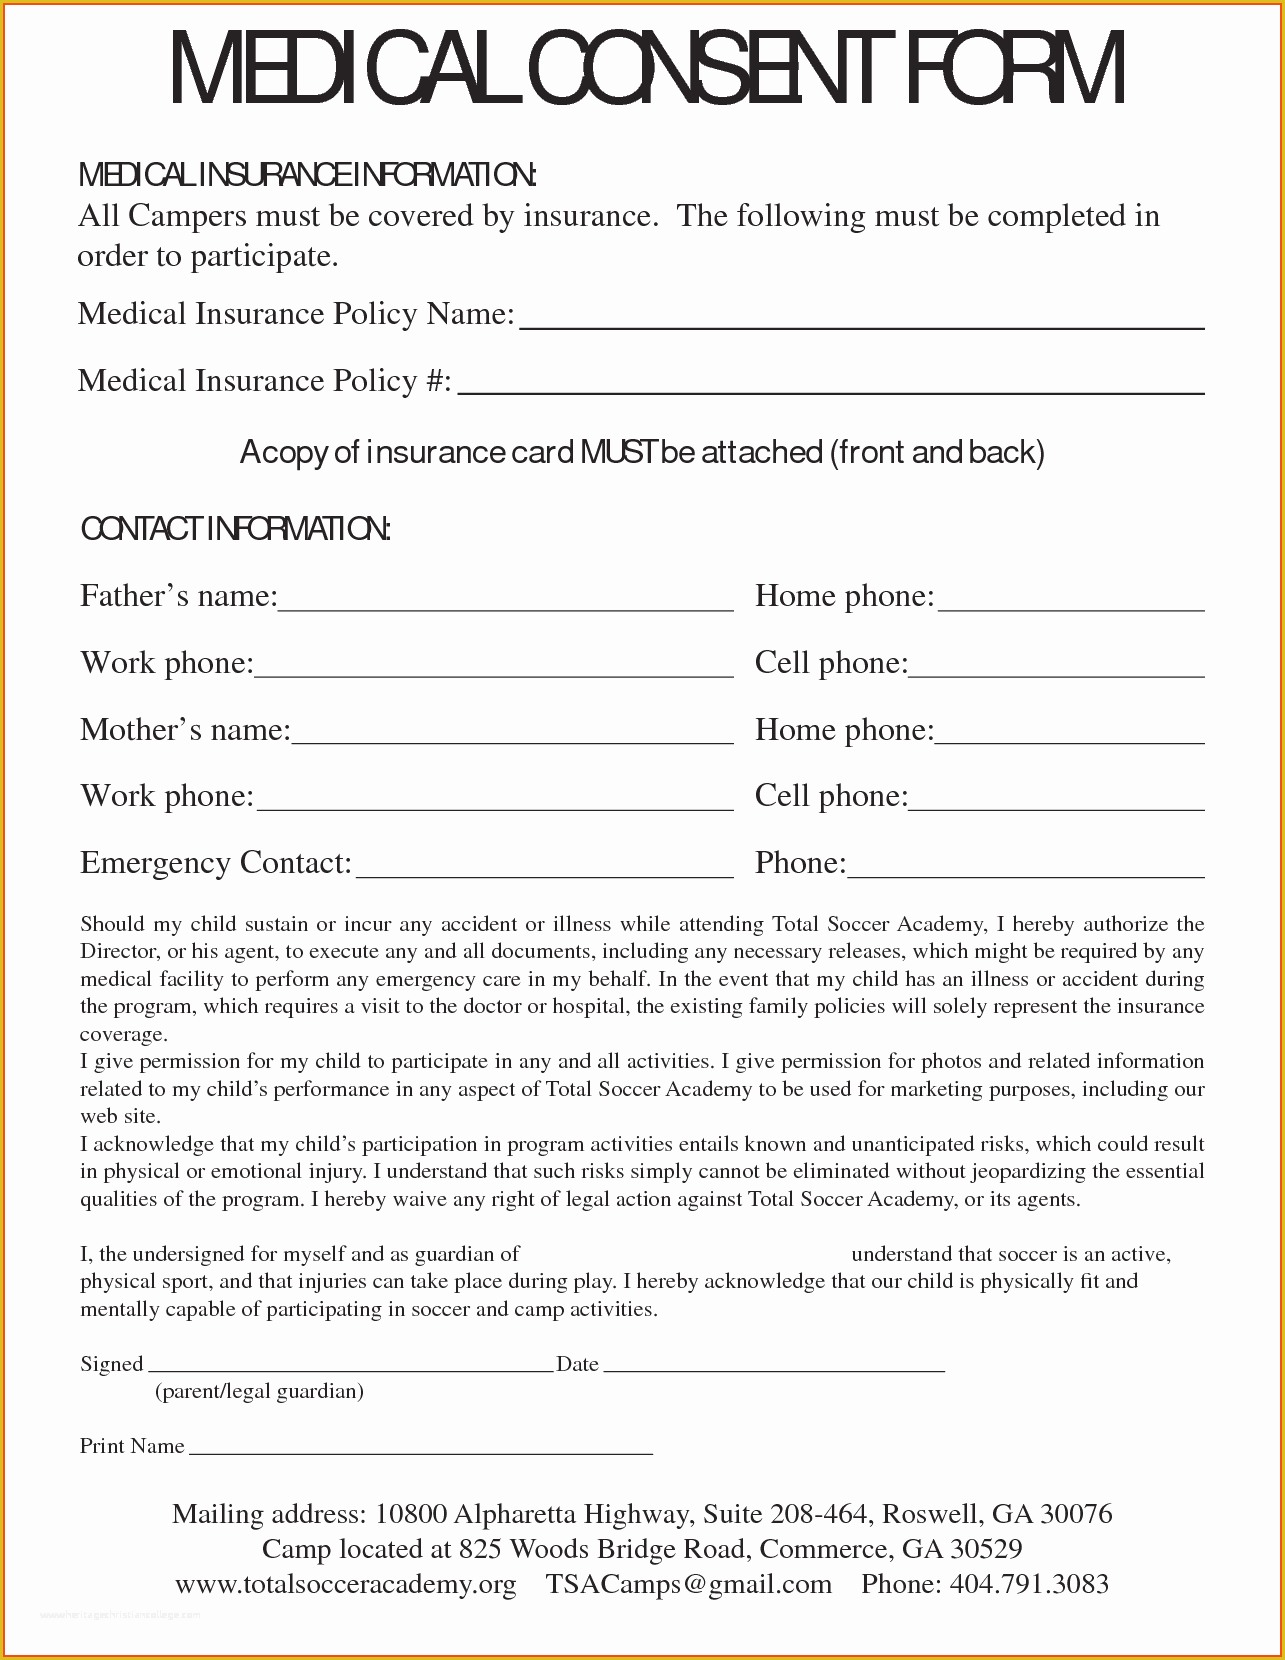 Free Medical Consent form Template Of Consent Child Medical Consent form